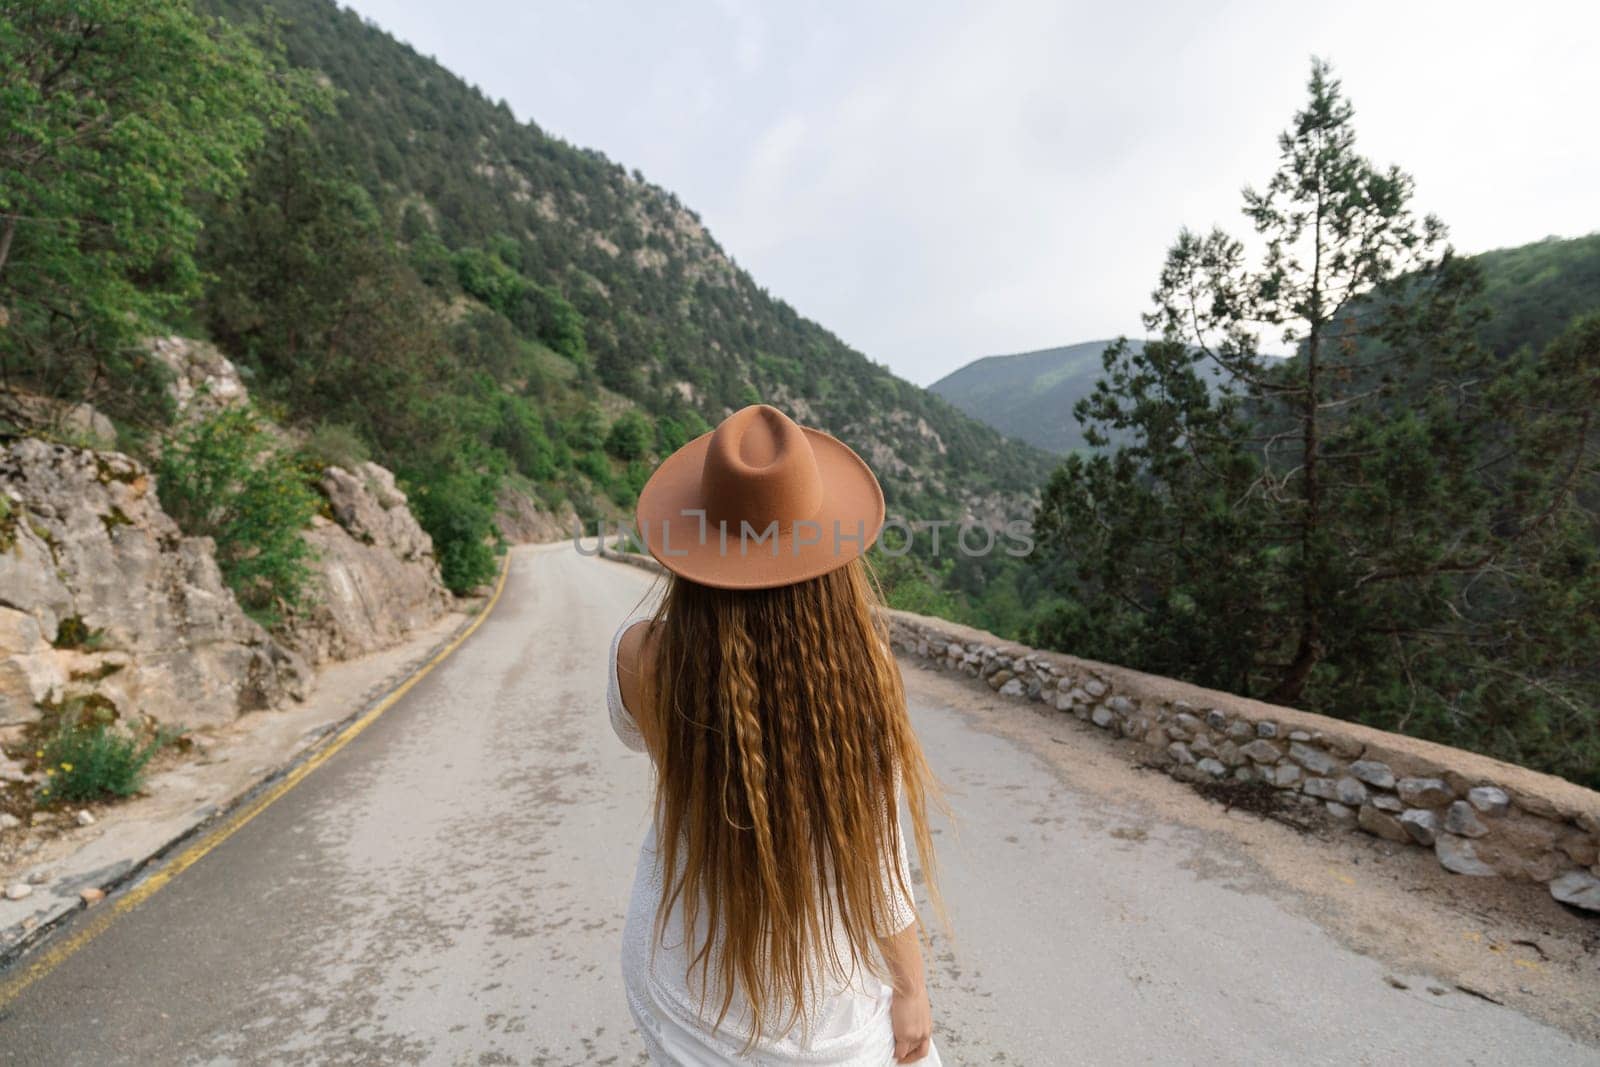 A woman wearing a brown hat walks down a road. The road is empty and the sky is cloudy